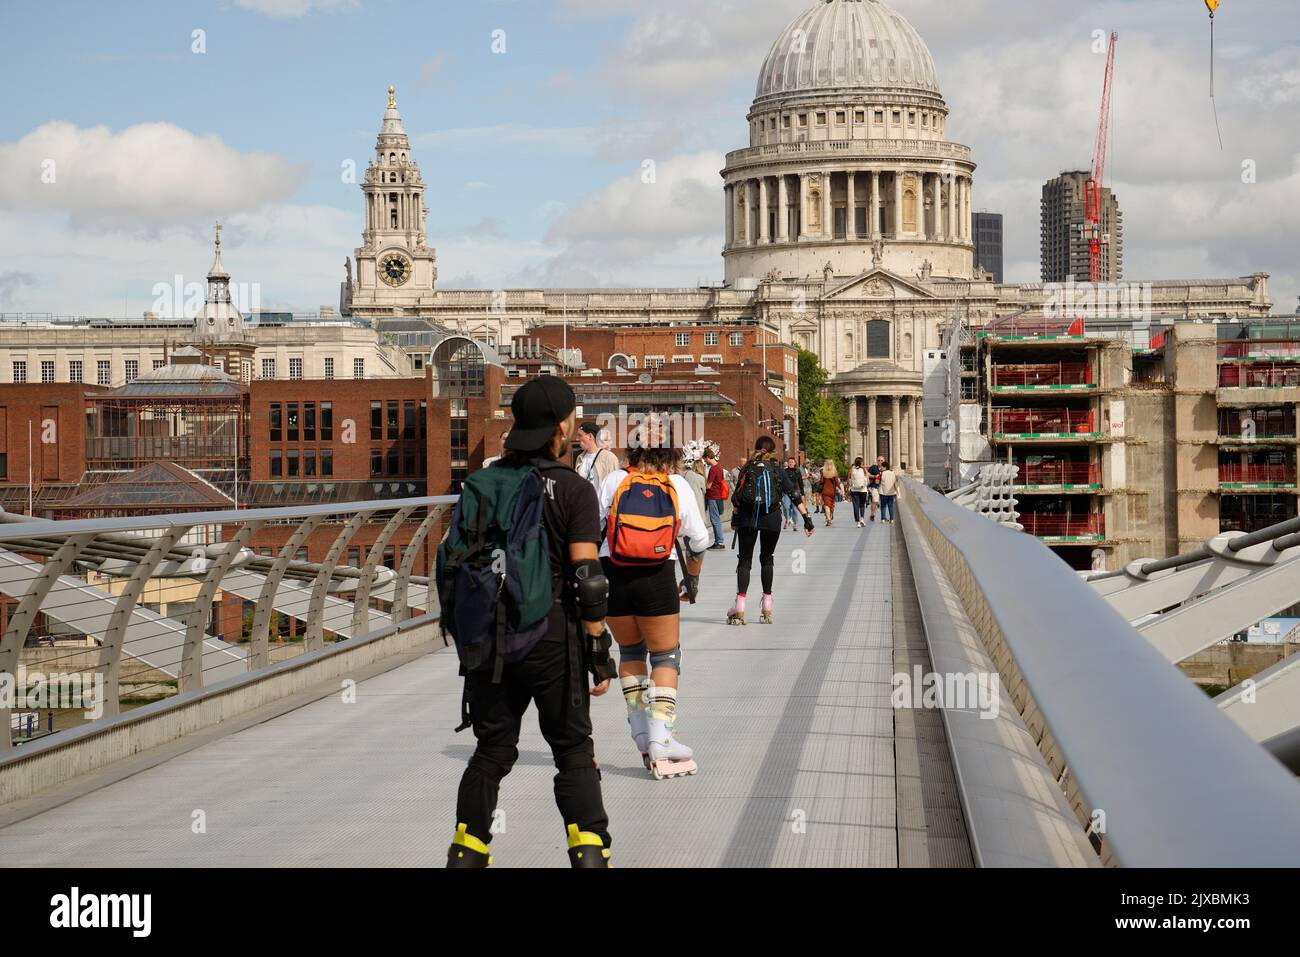 St Pauls Cathedral, London, England. Roller bladers or roller skaters on The Millennium Bridge in London. Stock Photo